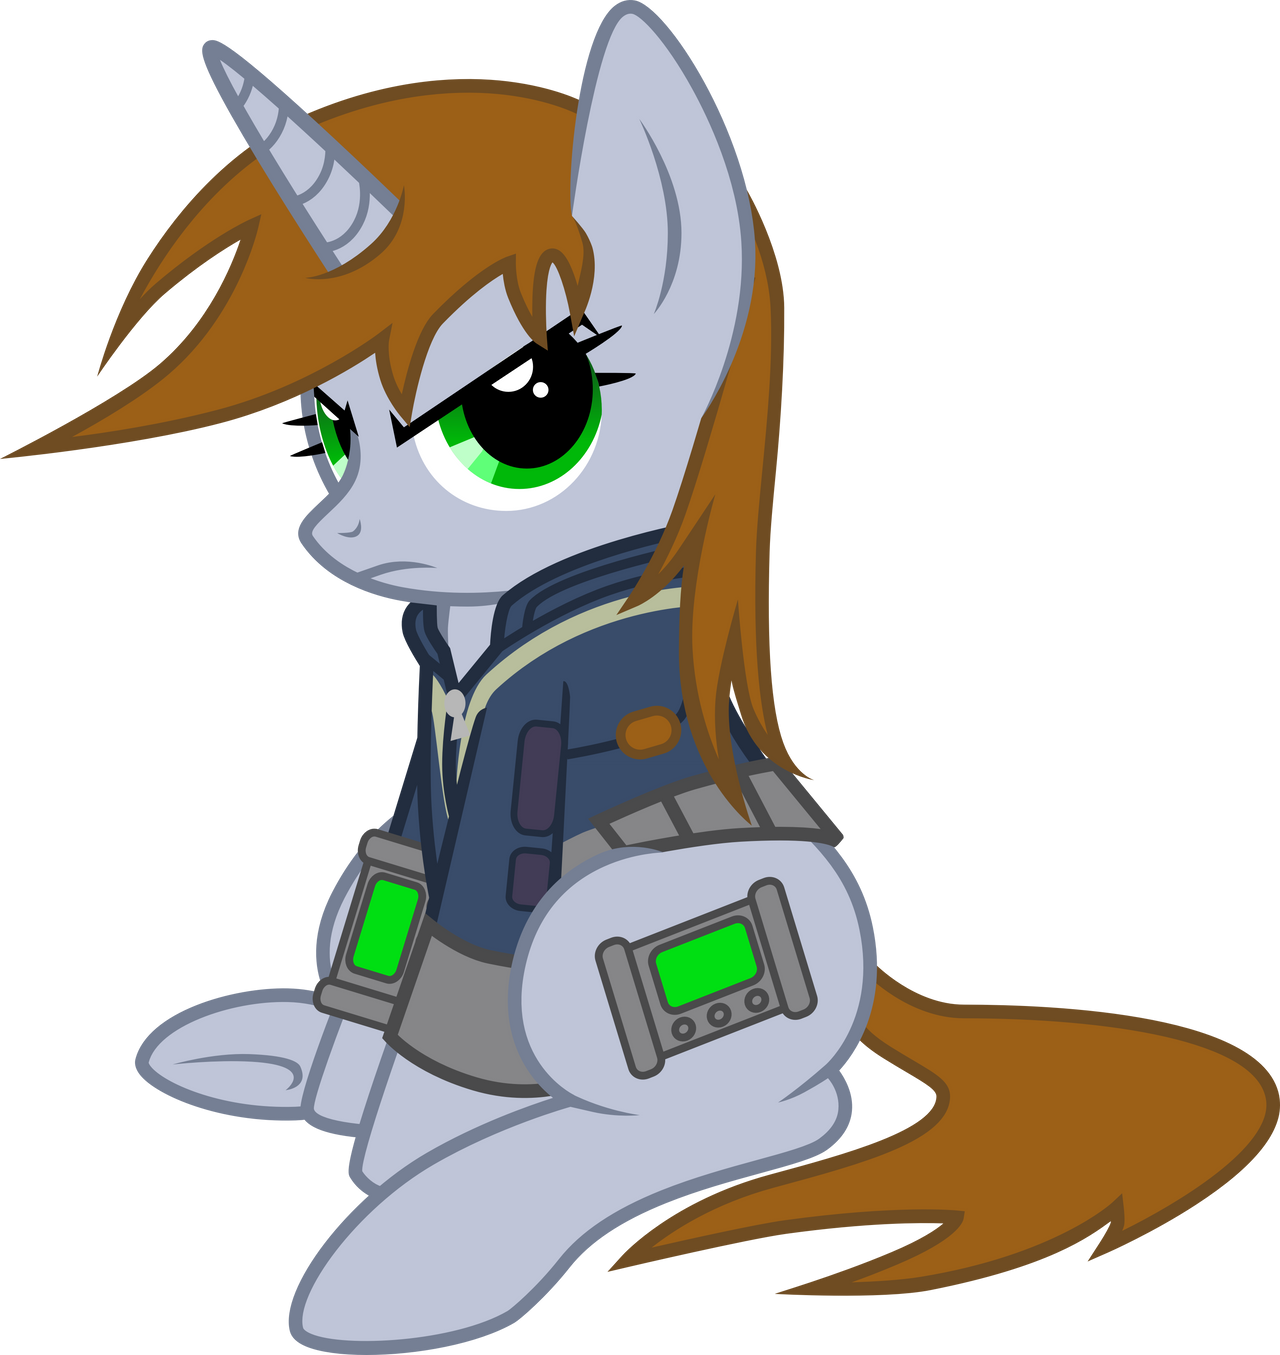 [Image: little_pip_is_not_amused_by_groxy_cyber_...5ld944.png]